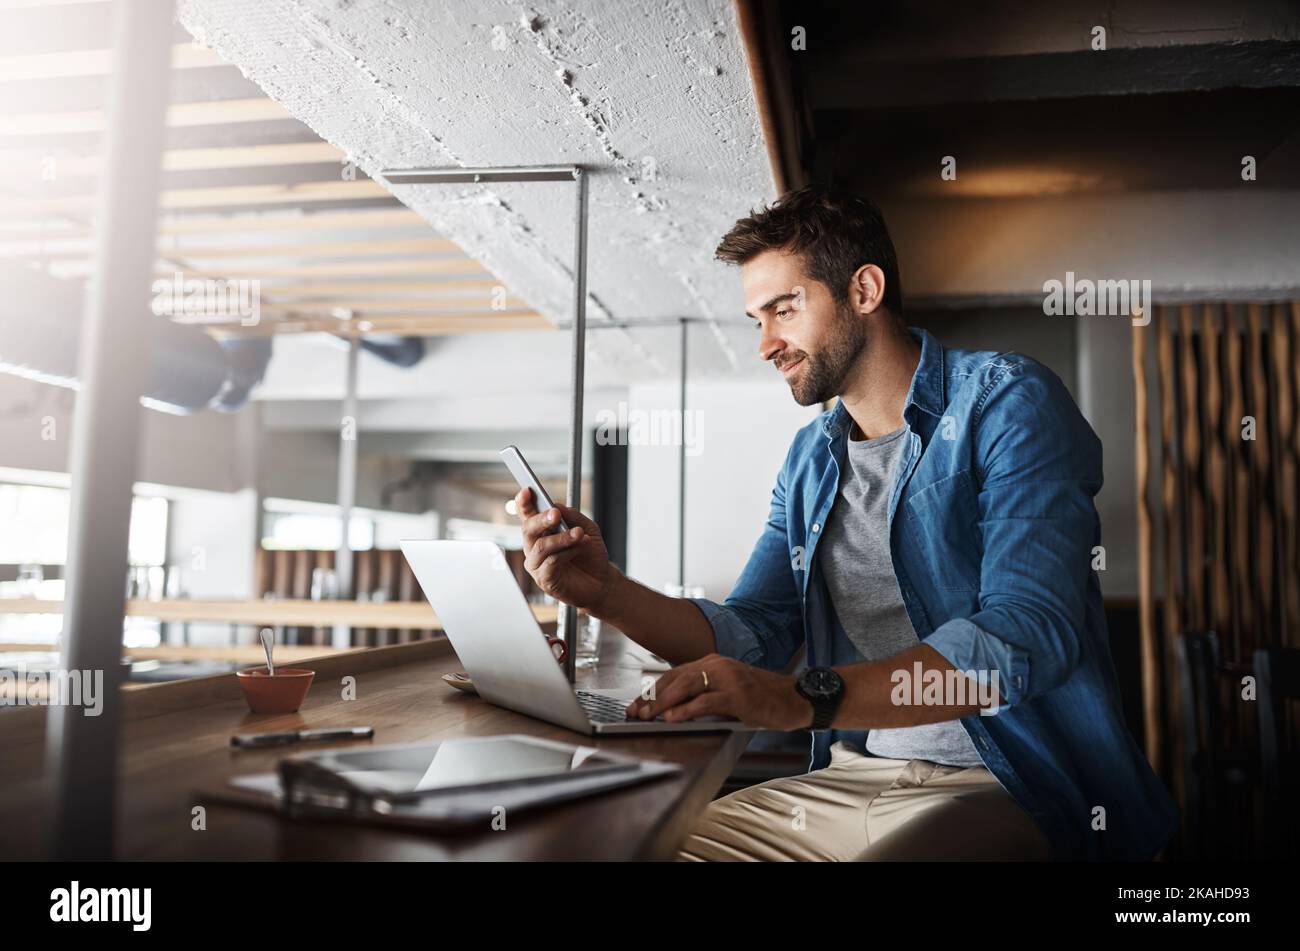 Everyday is an opportunity to expand his business. a handsome young man using a laptop and phone in a coffee shop. Stock Photo